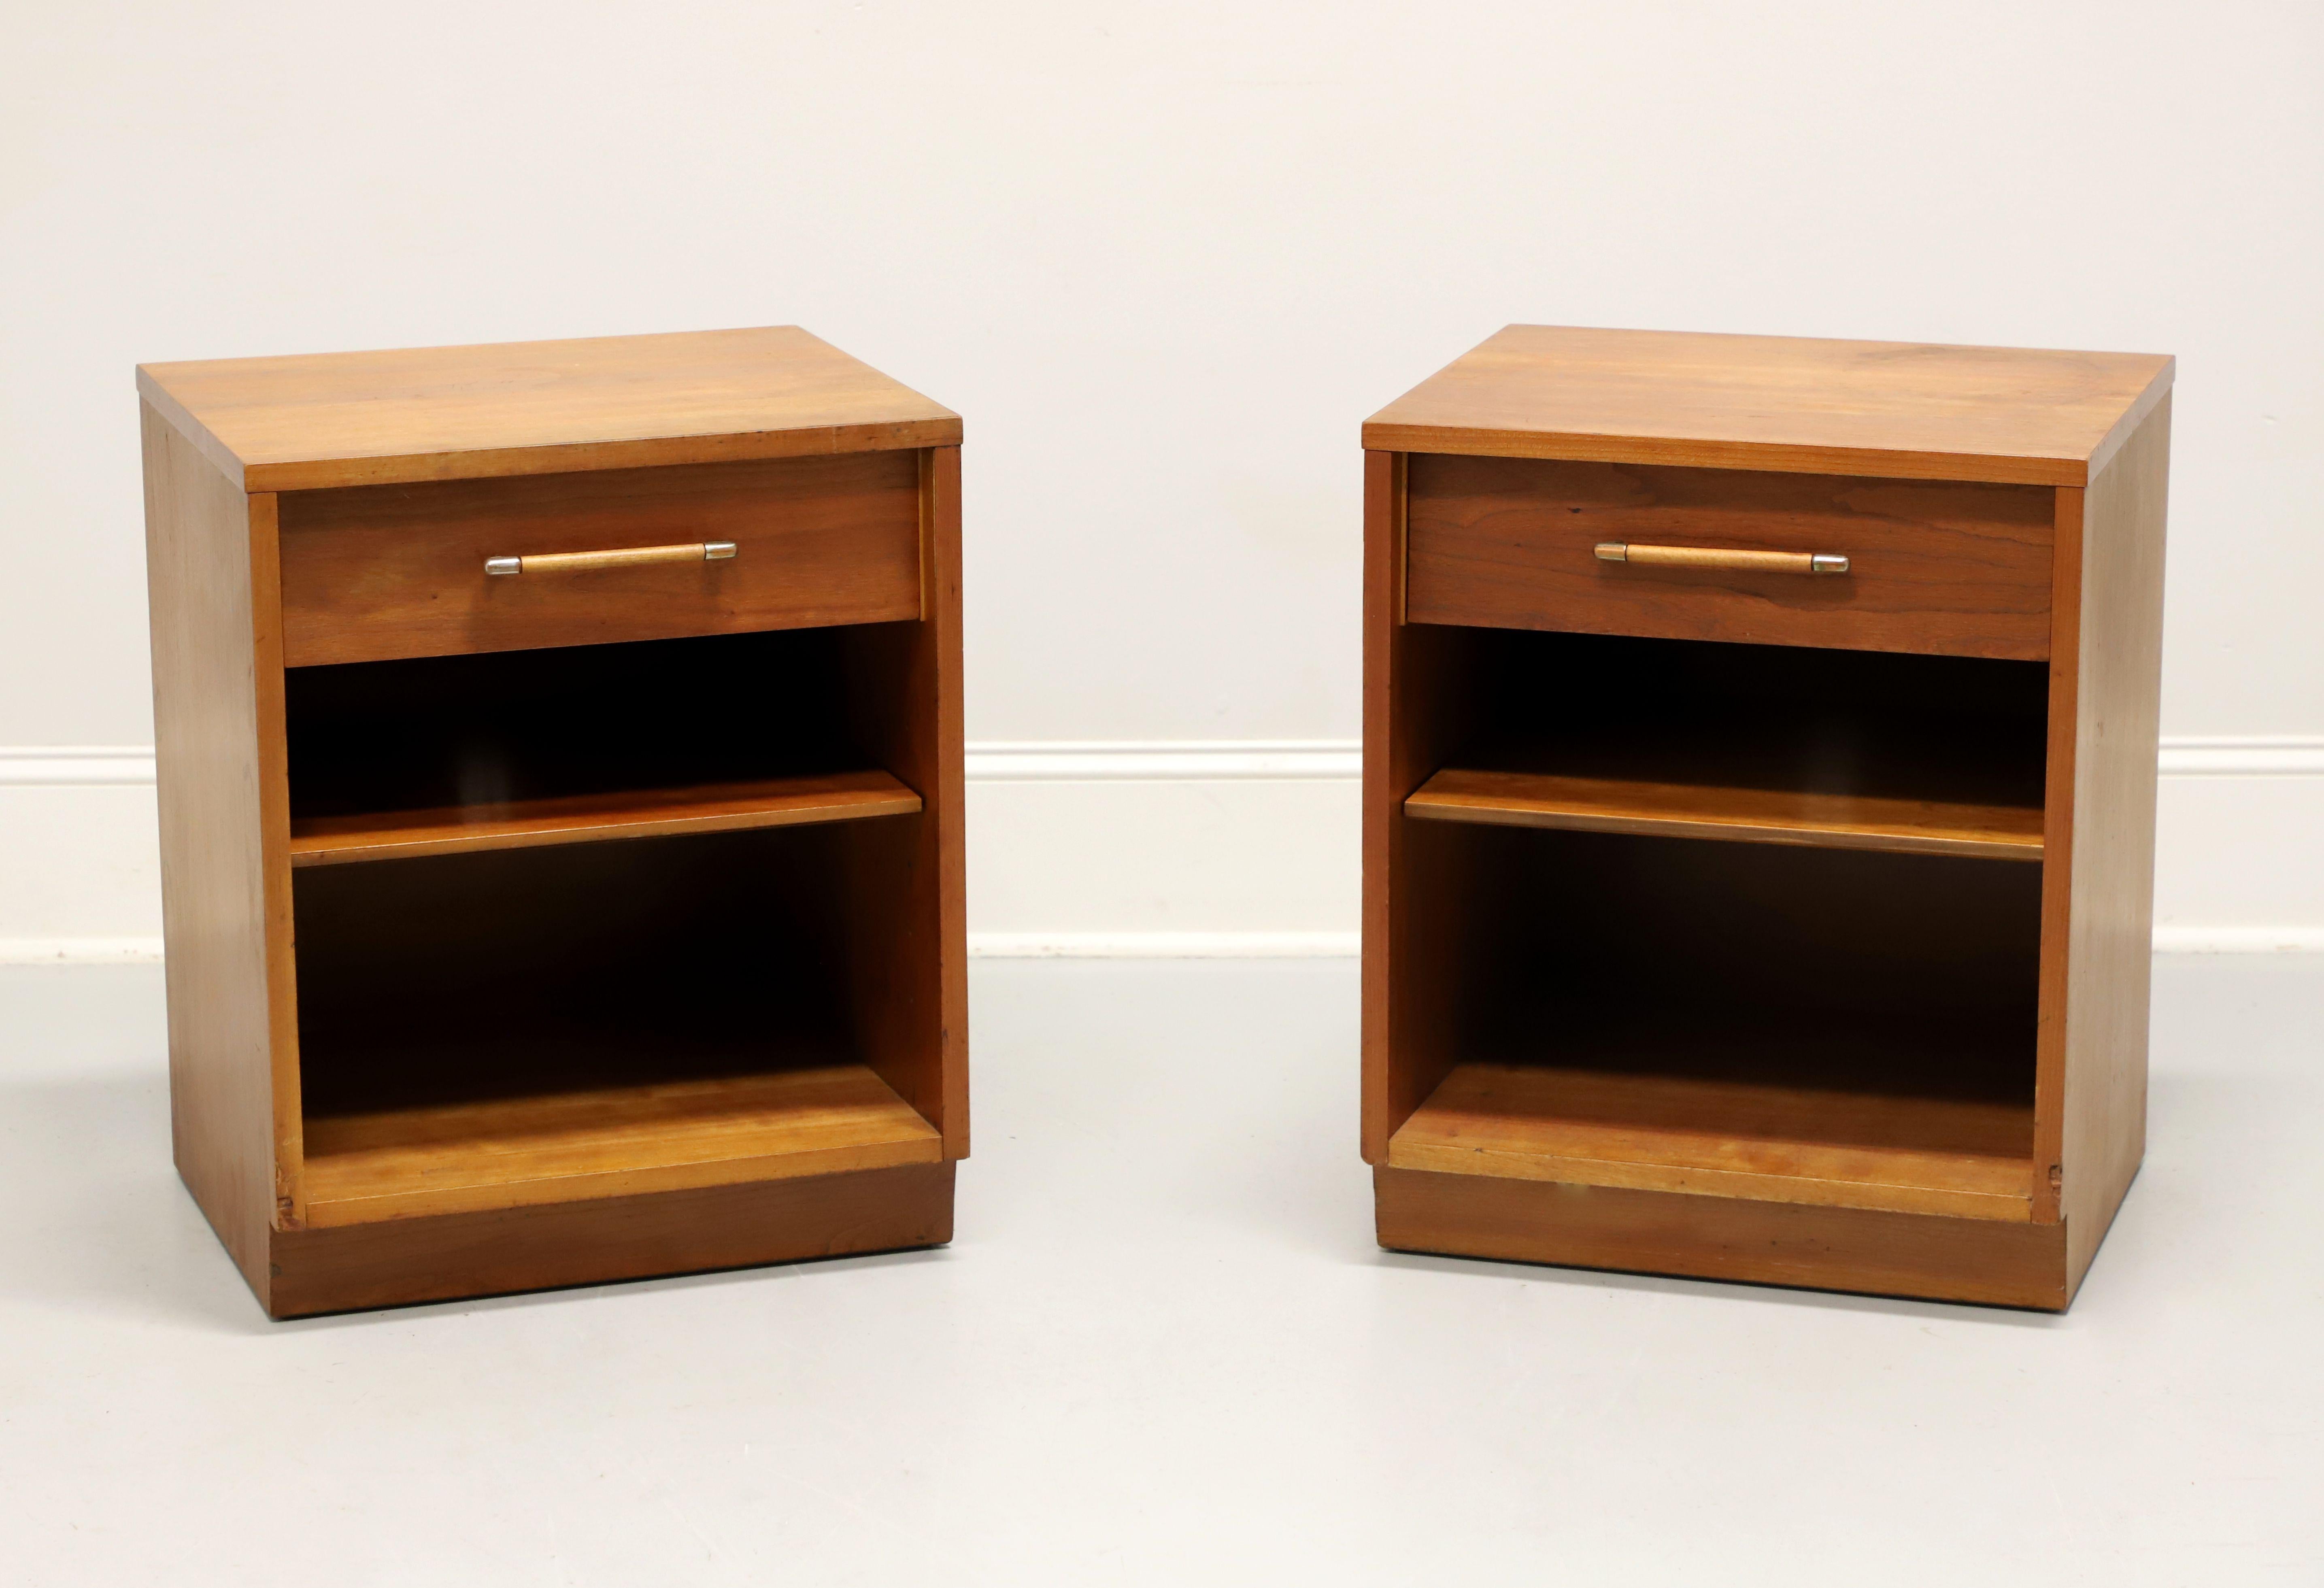 A pair of Mid 20th Century Modern style nightstands by Heritage Henredon, a collaboration between Henredon and Drexel Heritage. Walnut with brass & walnut hardware, solid edge to the top, and a solid base. Features one drawer of dovetail